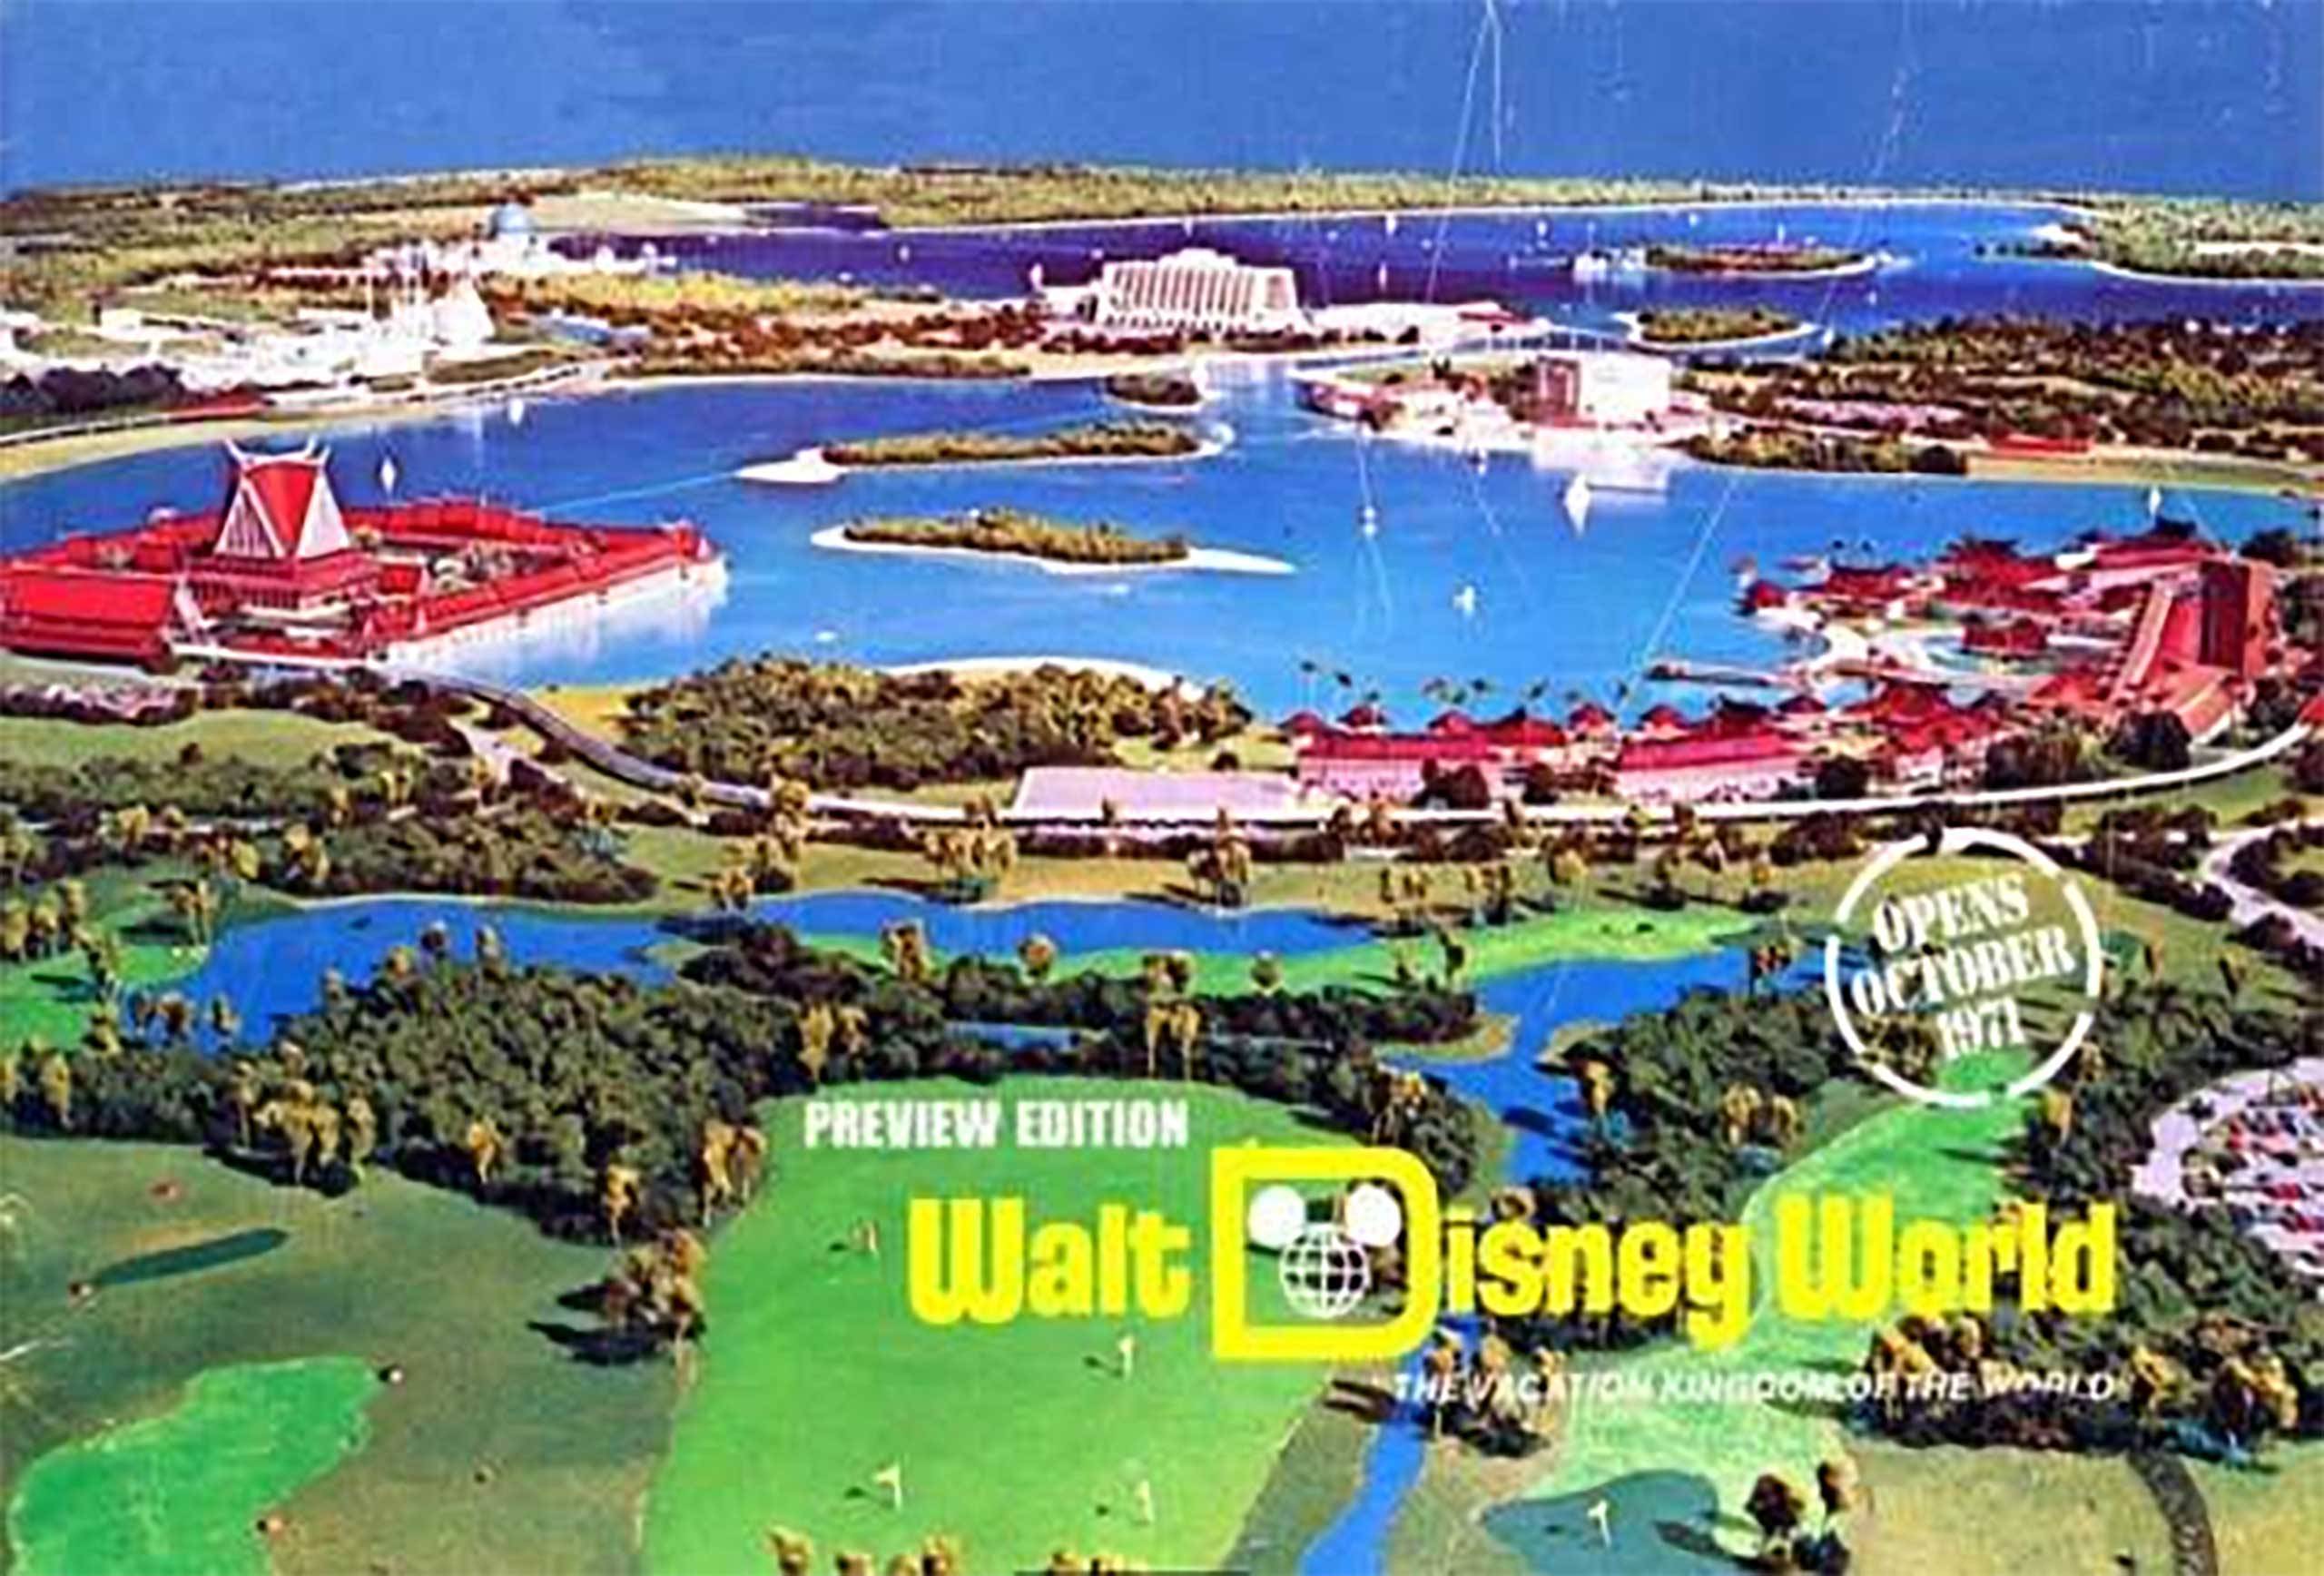 Activity on the potential Magic Kingdom area monorail resort site